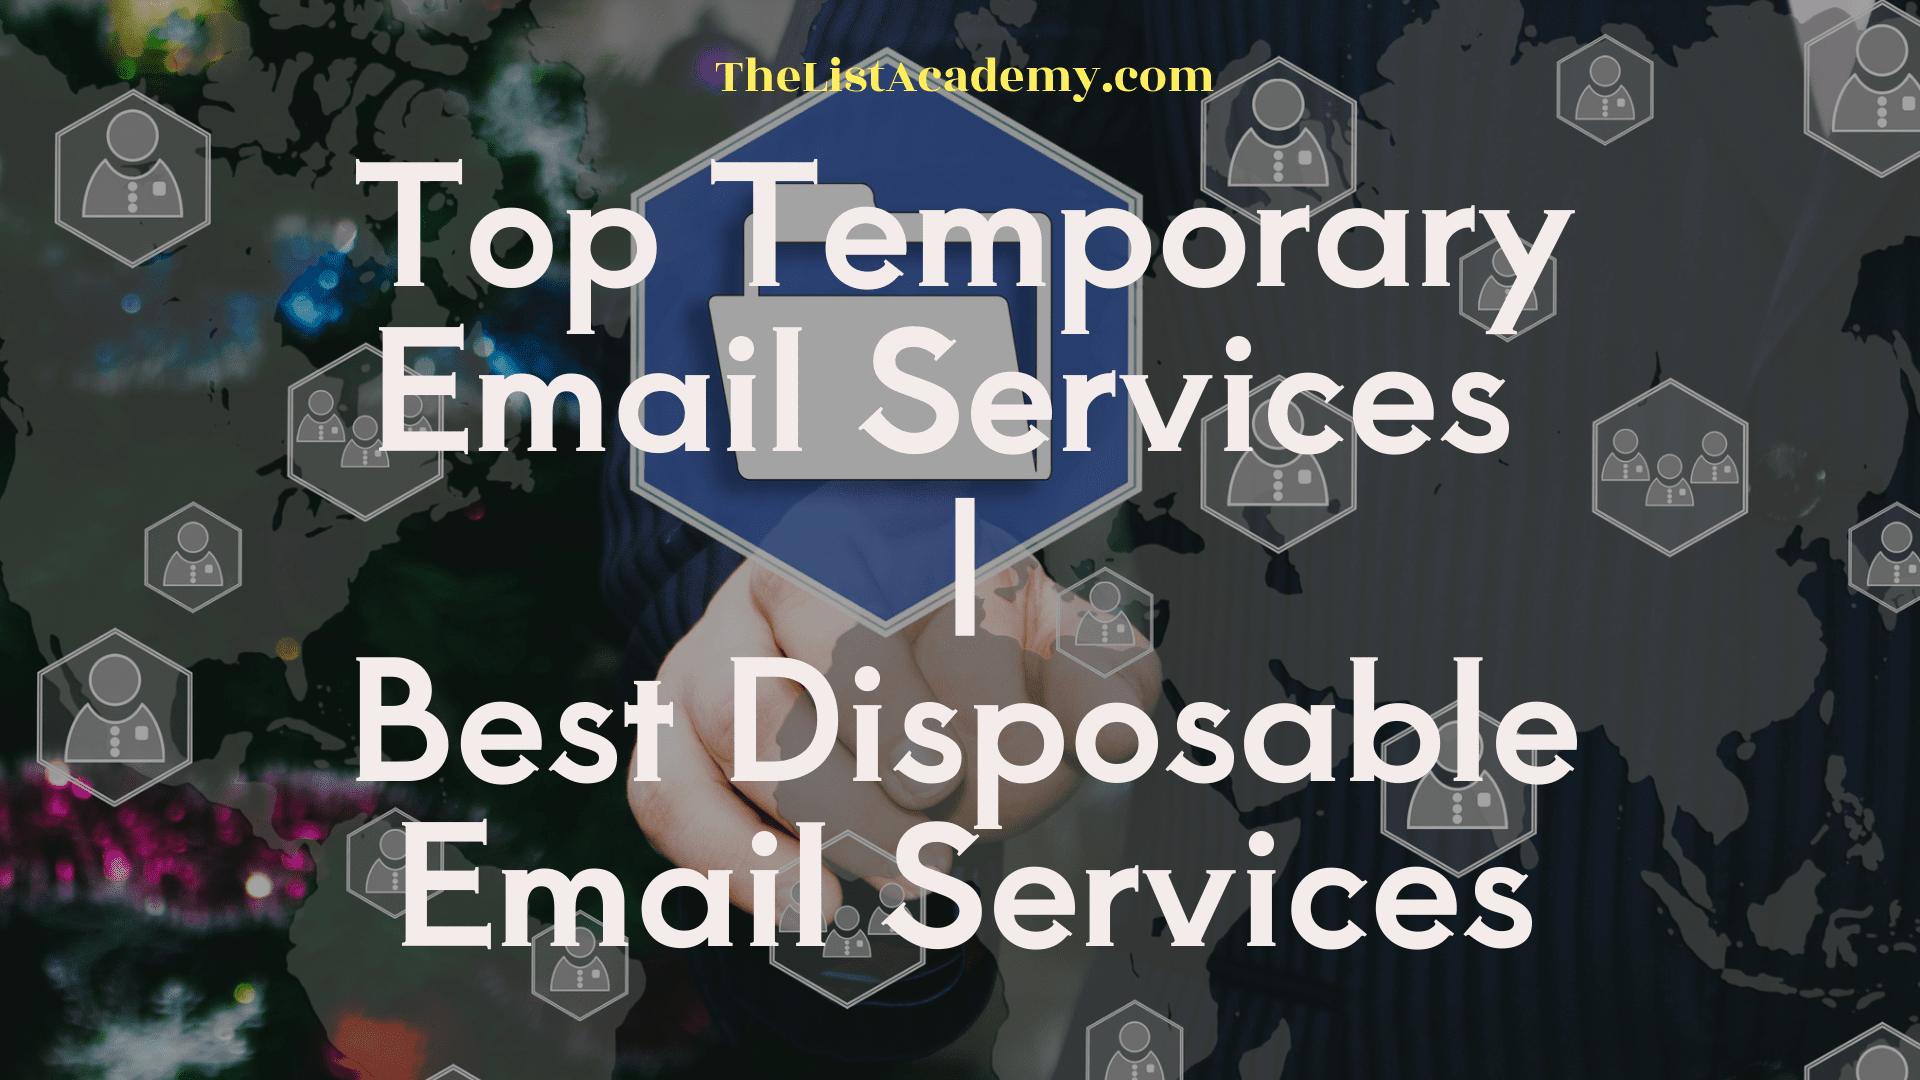 Cover Image For List : Top 43 Temporary Email Services | Best Disposable Email Services 